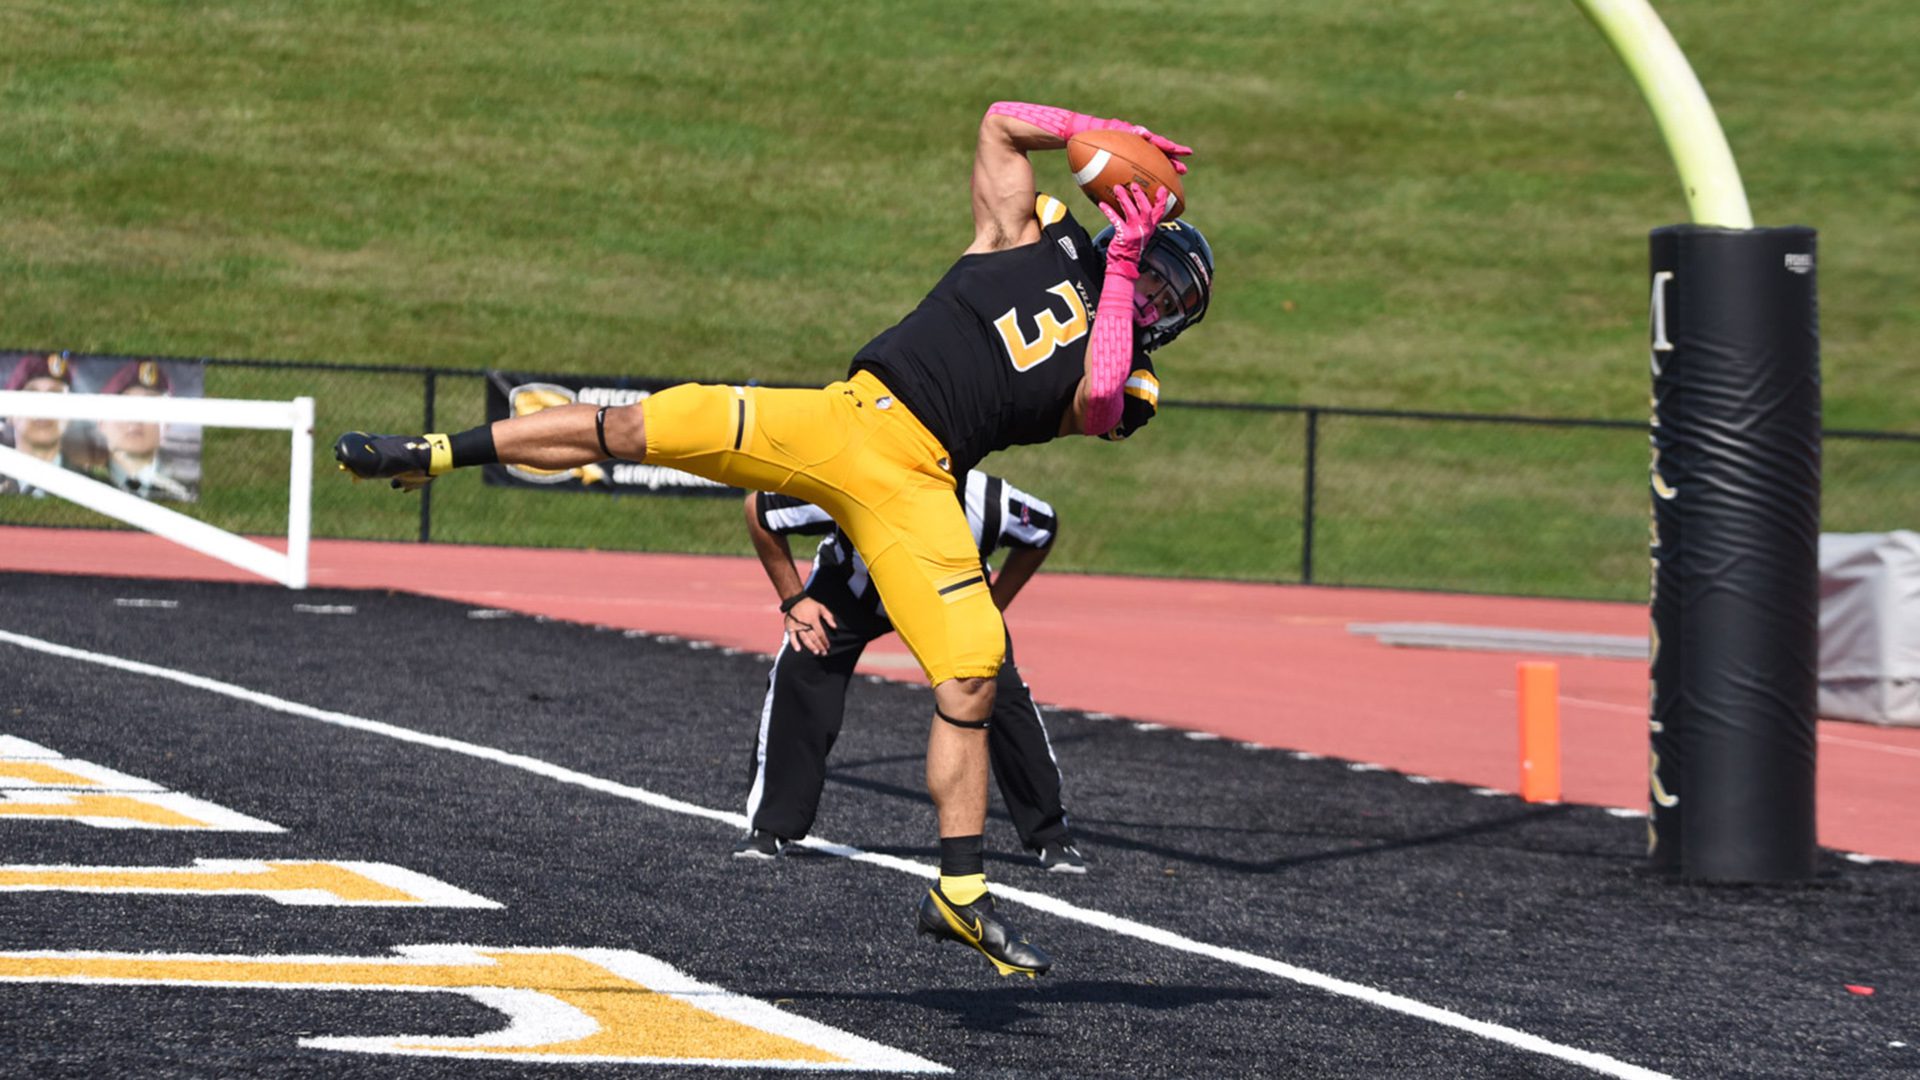 Christian Drayton III the standout wide receiver from Millersville University recently sat down with NFL Draft Diamonds scout Justin Berendzen.